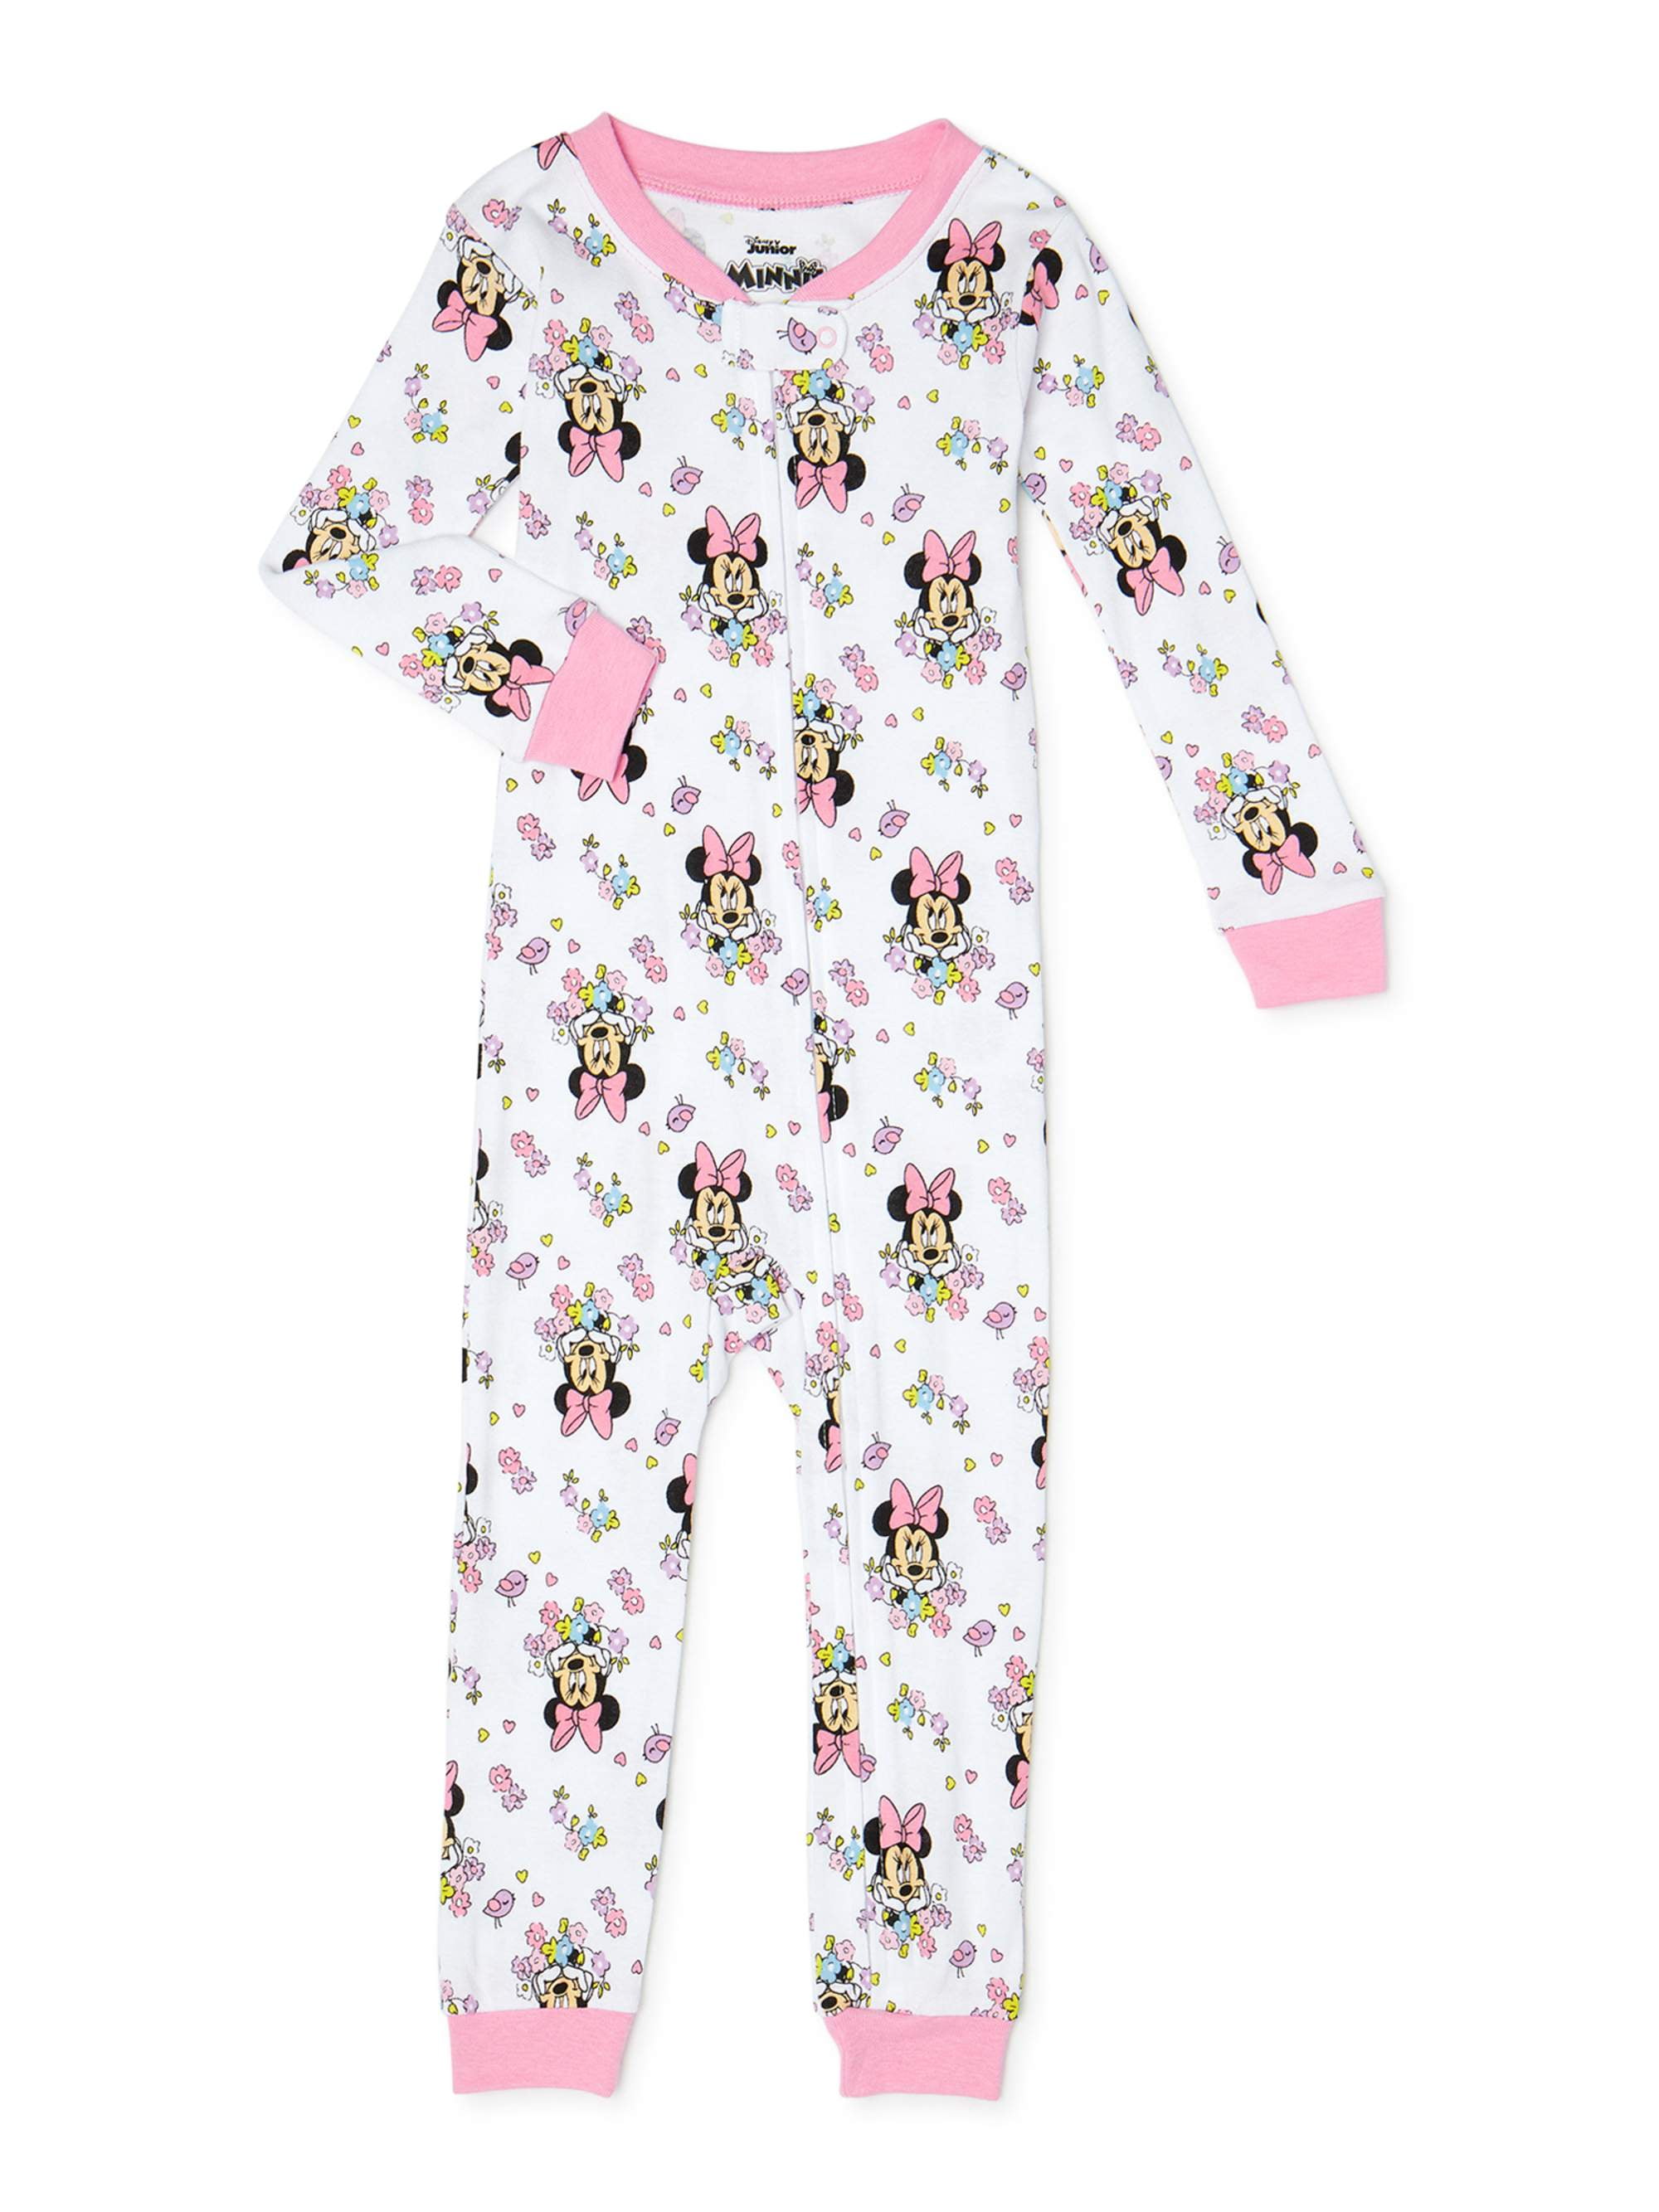 Really Cute Pink and White SO IN LOVE MINNIE MOUSE PJ's NEW 